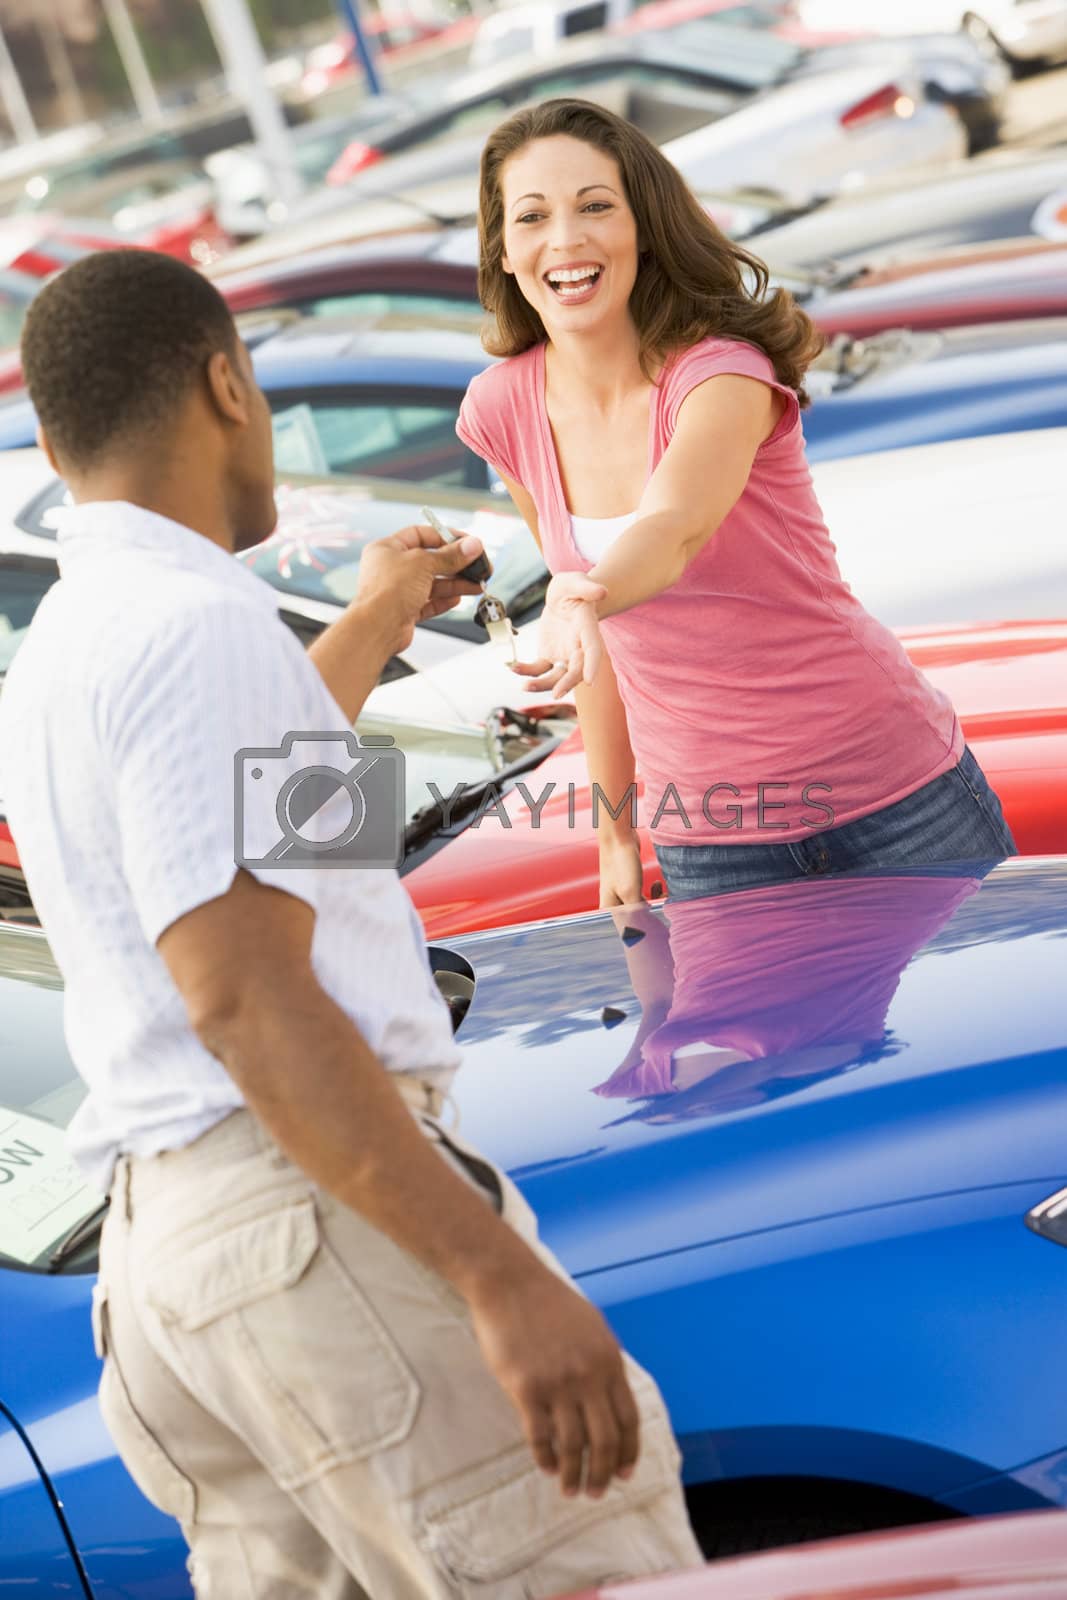 Royalty free image of Woman picking up keys to new car by MonkeyBusiness